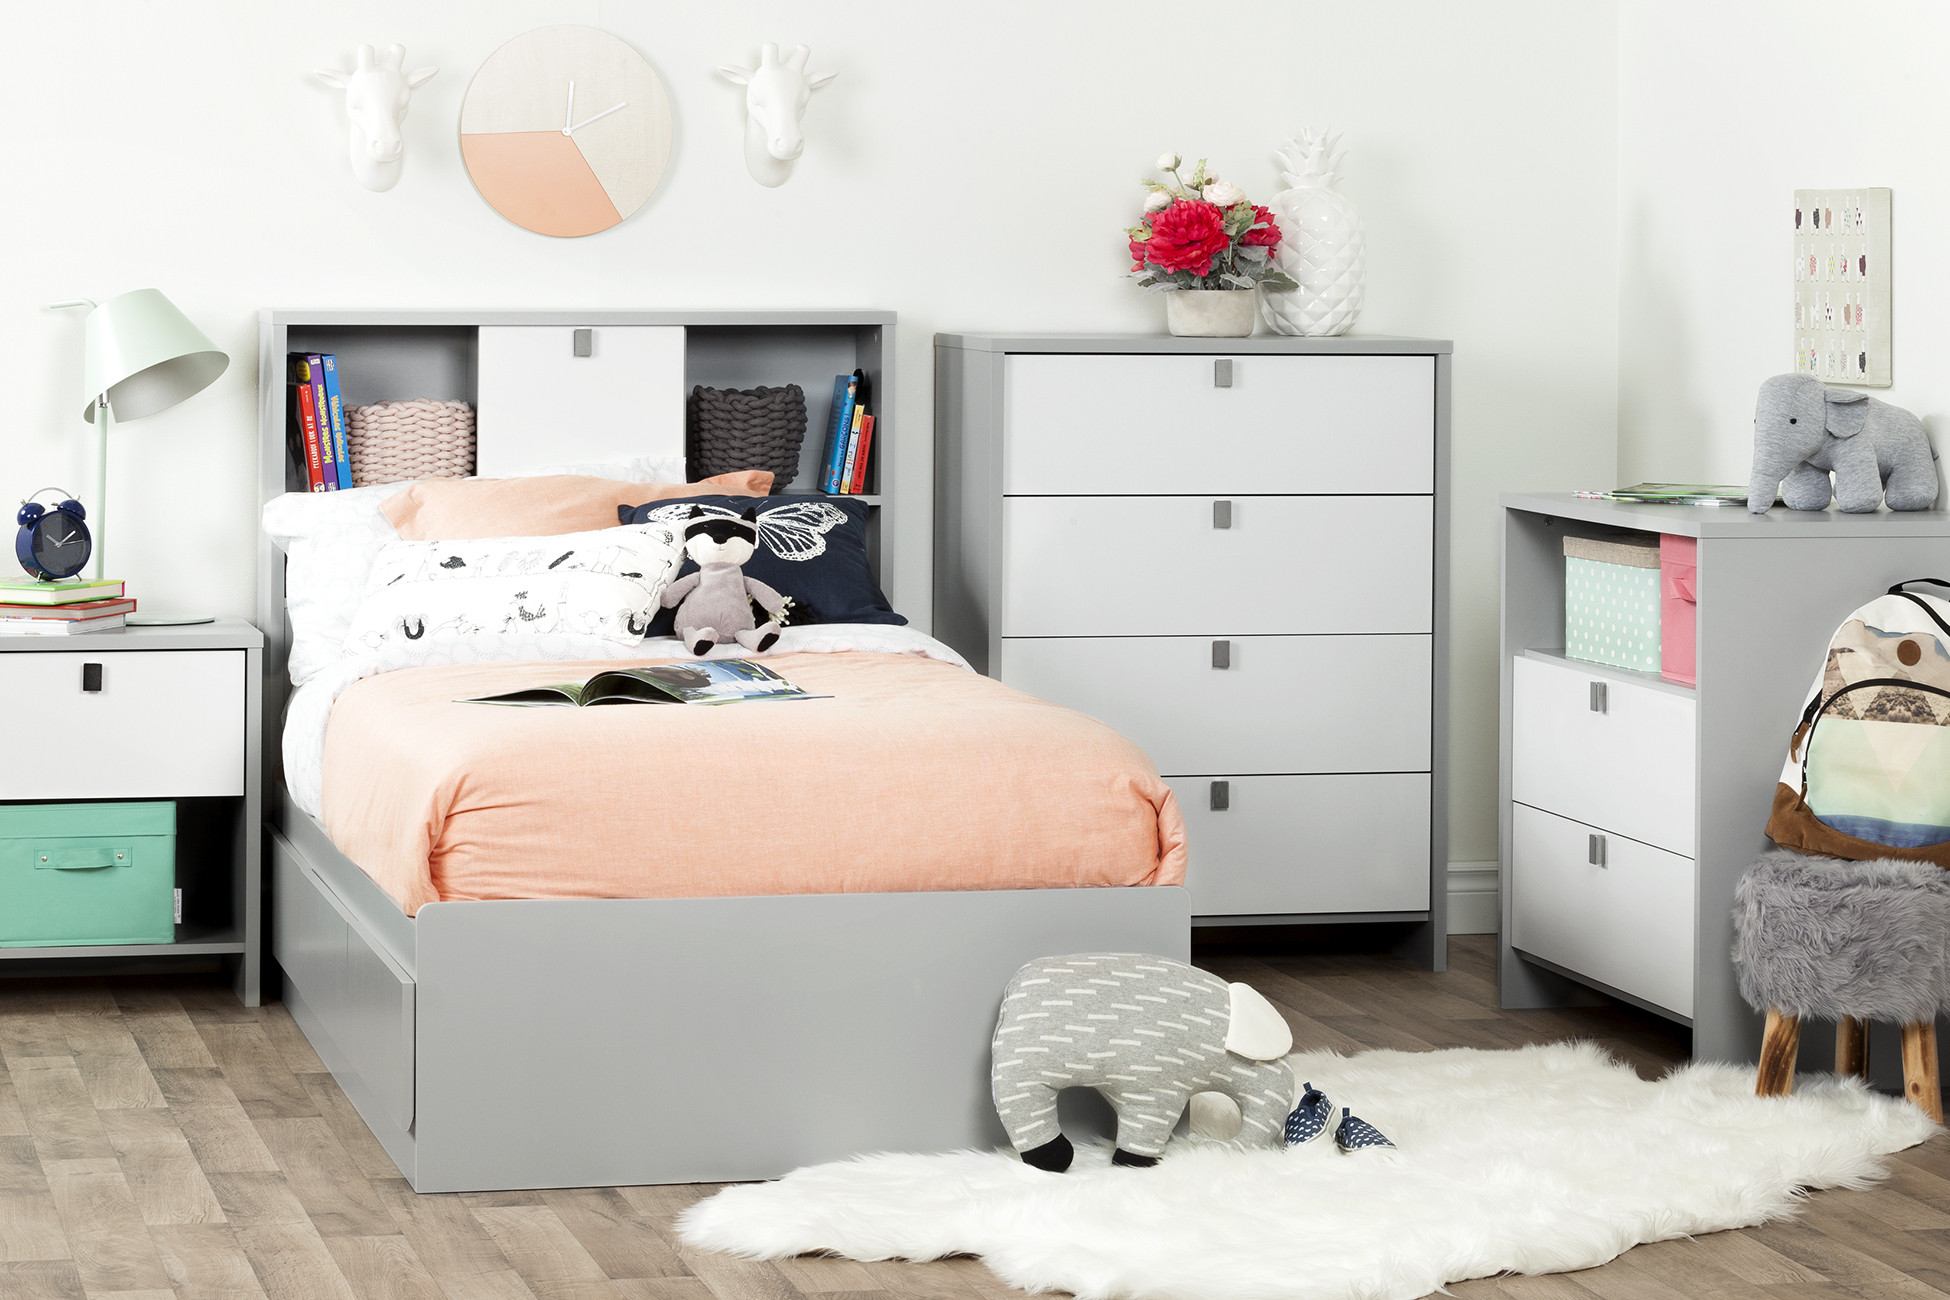 Walmart Bedroom Sets For Kids
 South Shore Cookie Kids and Baby Bedroom Furniture